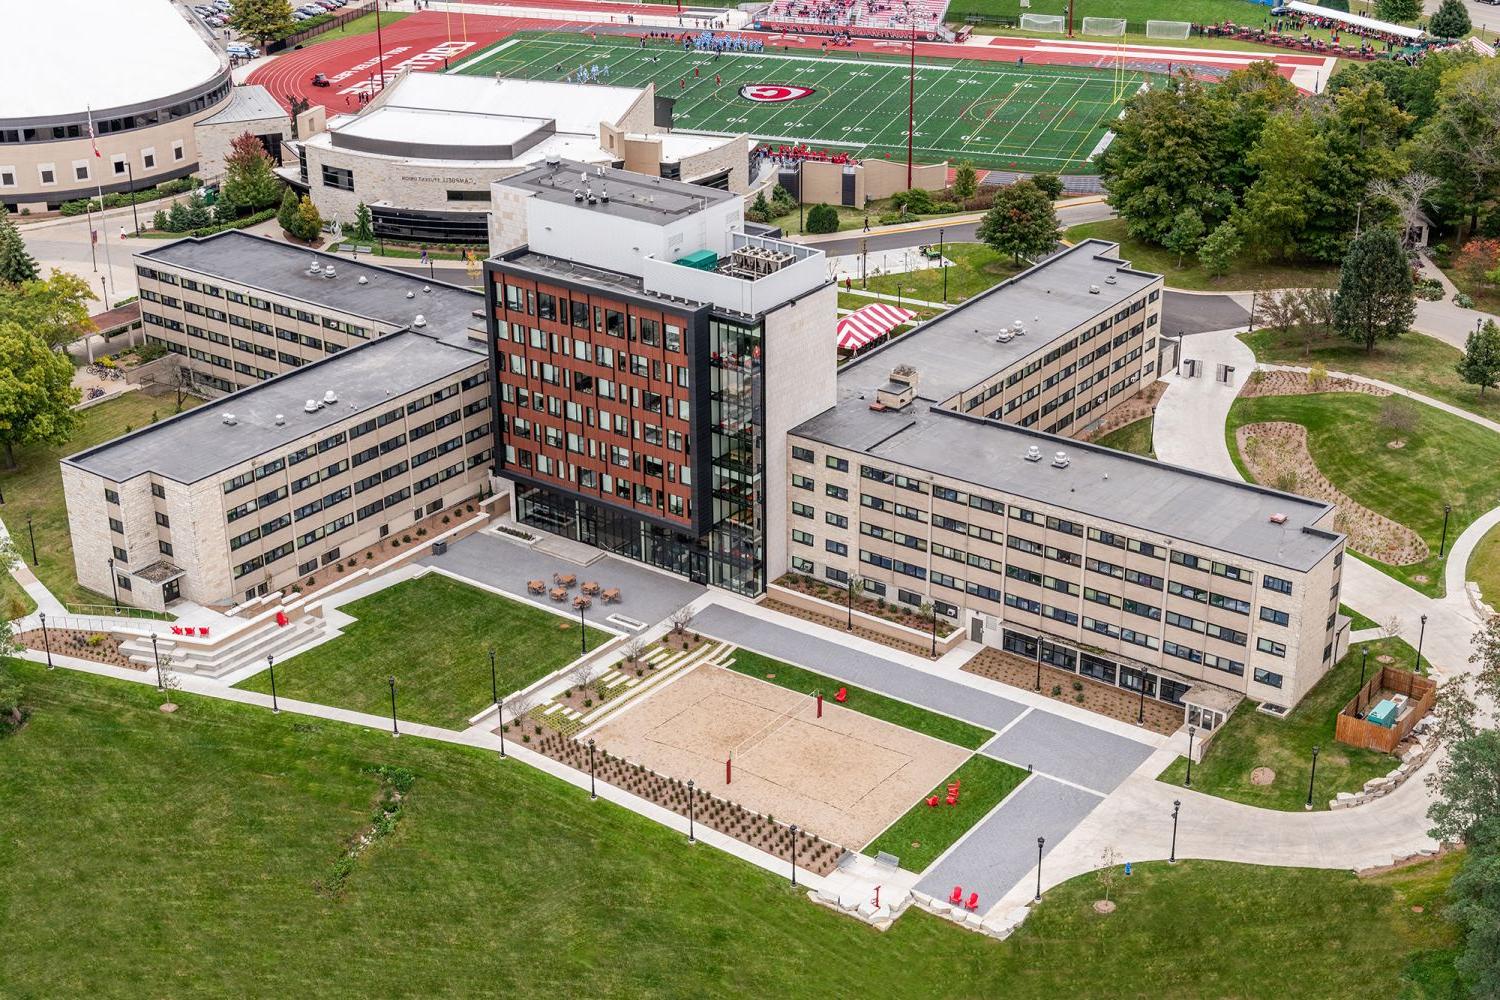 Take a closer look at our residence halls for undergraduate and graduate students!